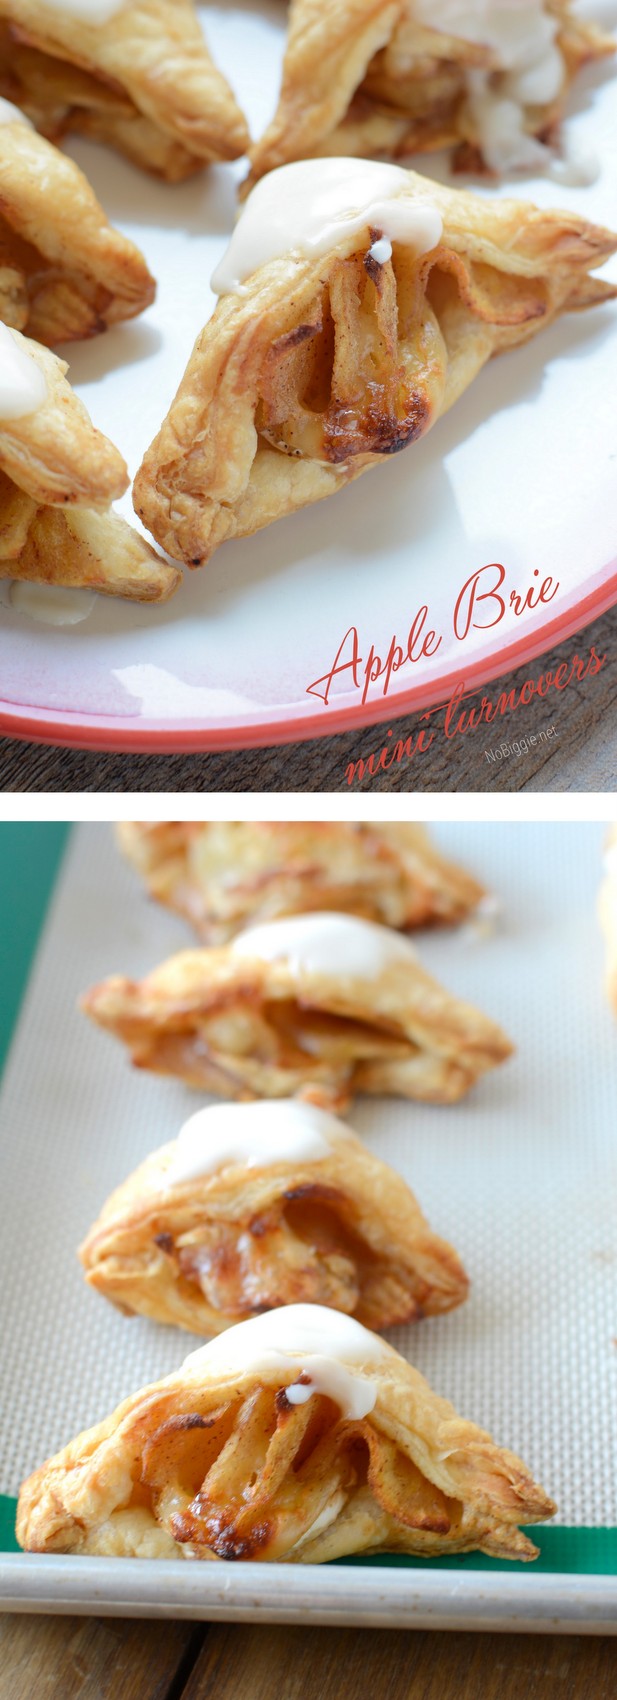 mini apple brie turnovers - a perfect appetizer | get the recipe on NoBiggie.net